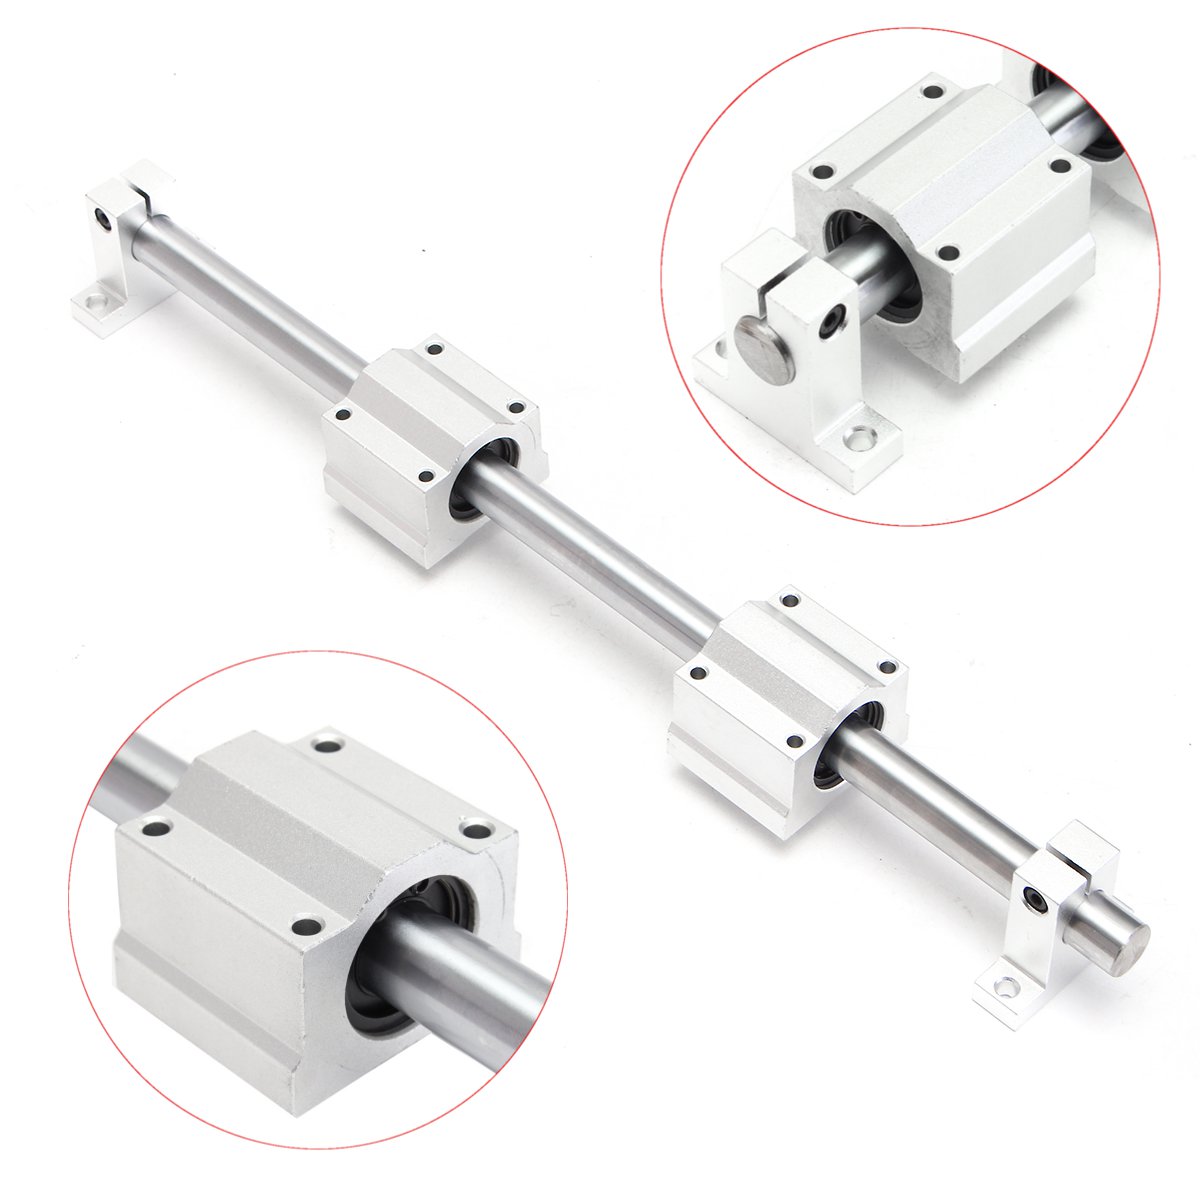 Machifit-16mm-x-1000mm-Linear-Rail-Shaft-With-Bearing-Block-and-Guide-Support-For-CNC-Parts-1390357-2